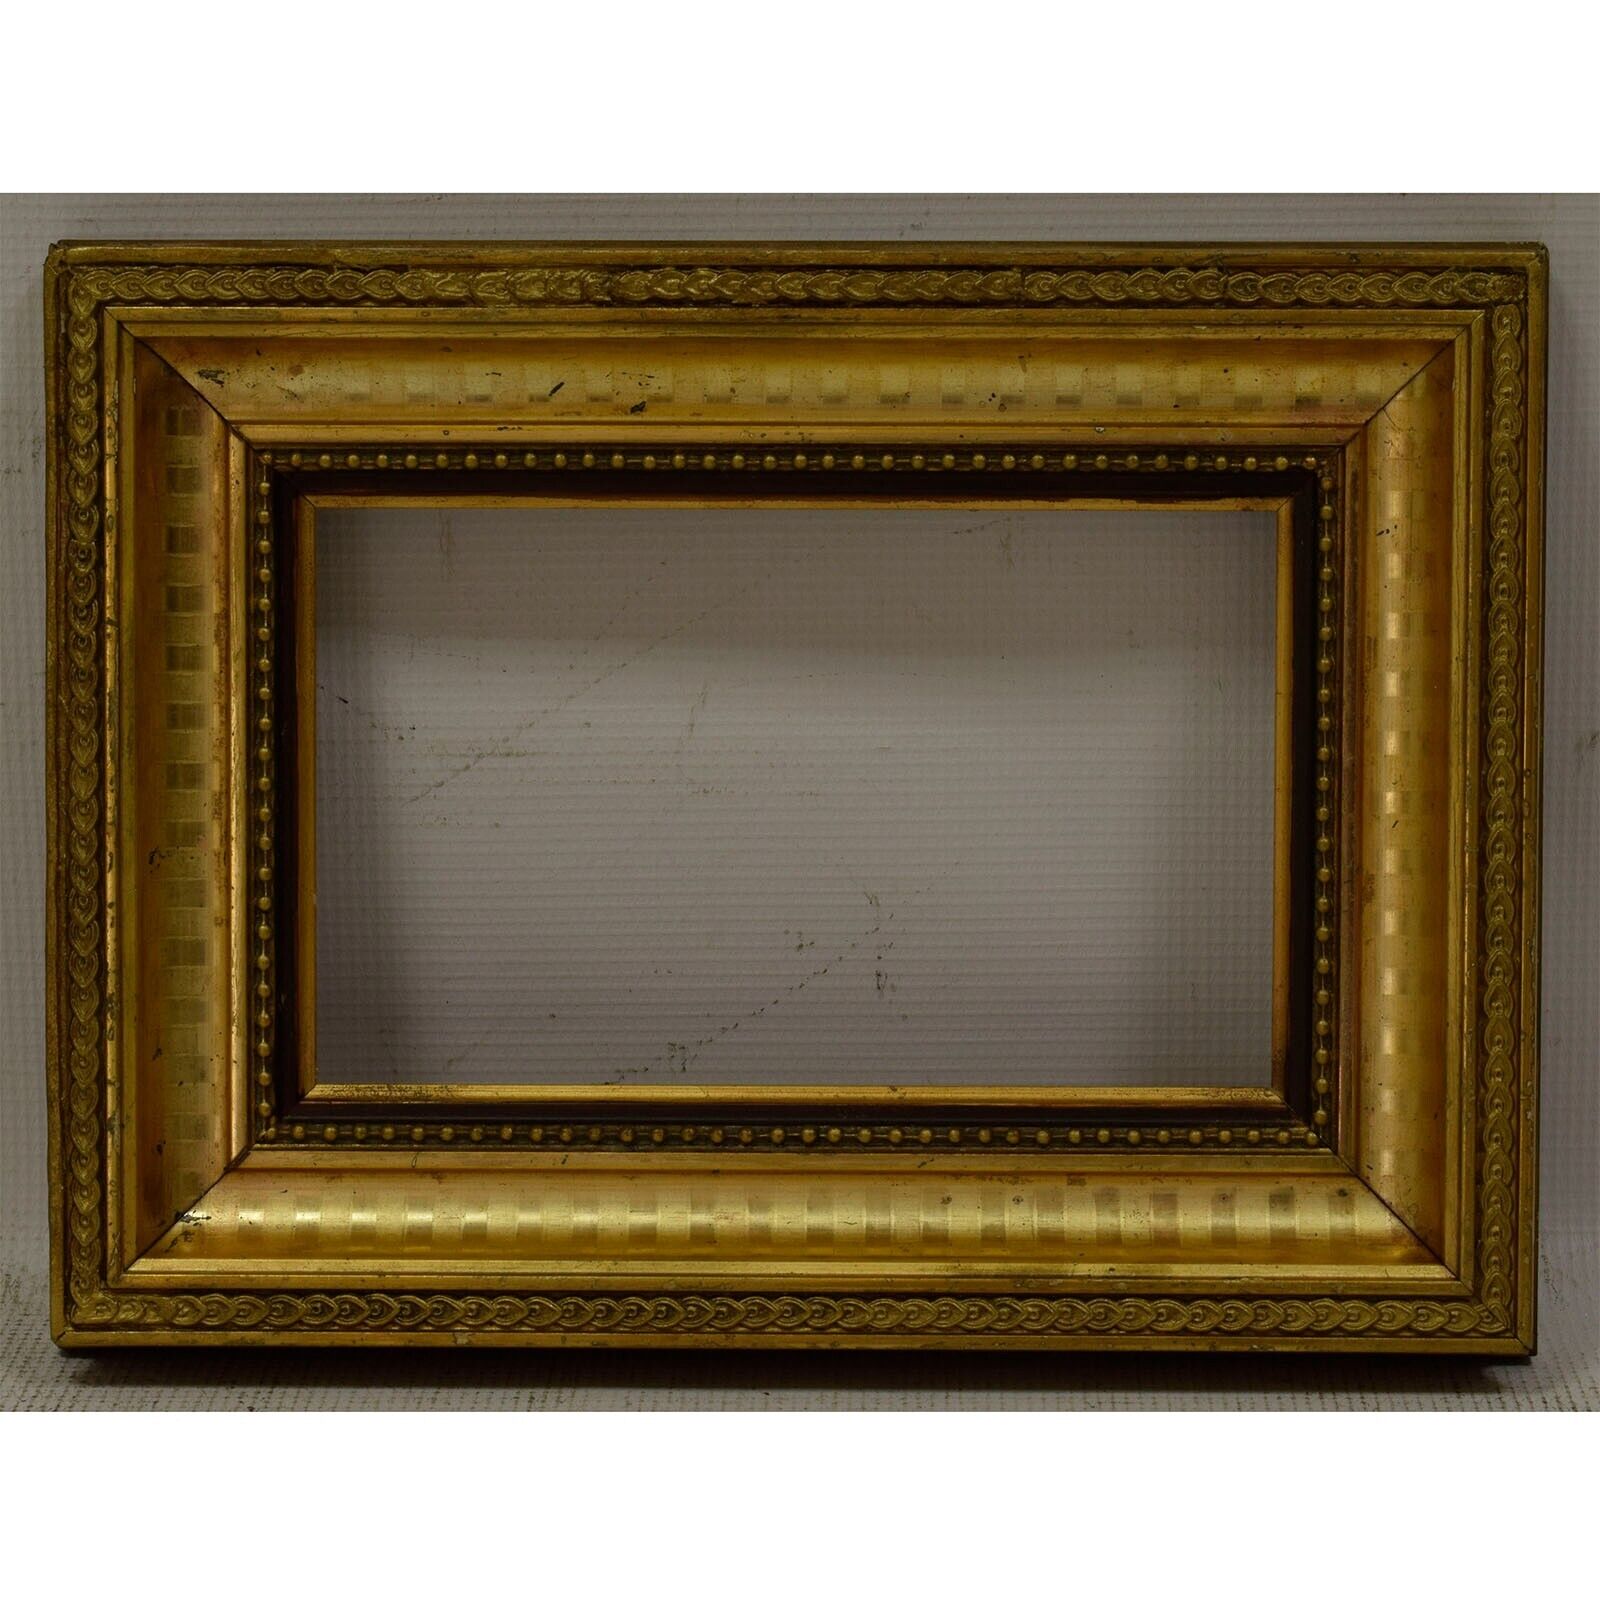 Ca 1900 Old wooden frame original condition Internal: 8.5 x 5.3 in